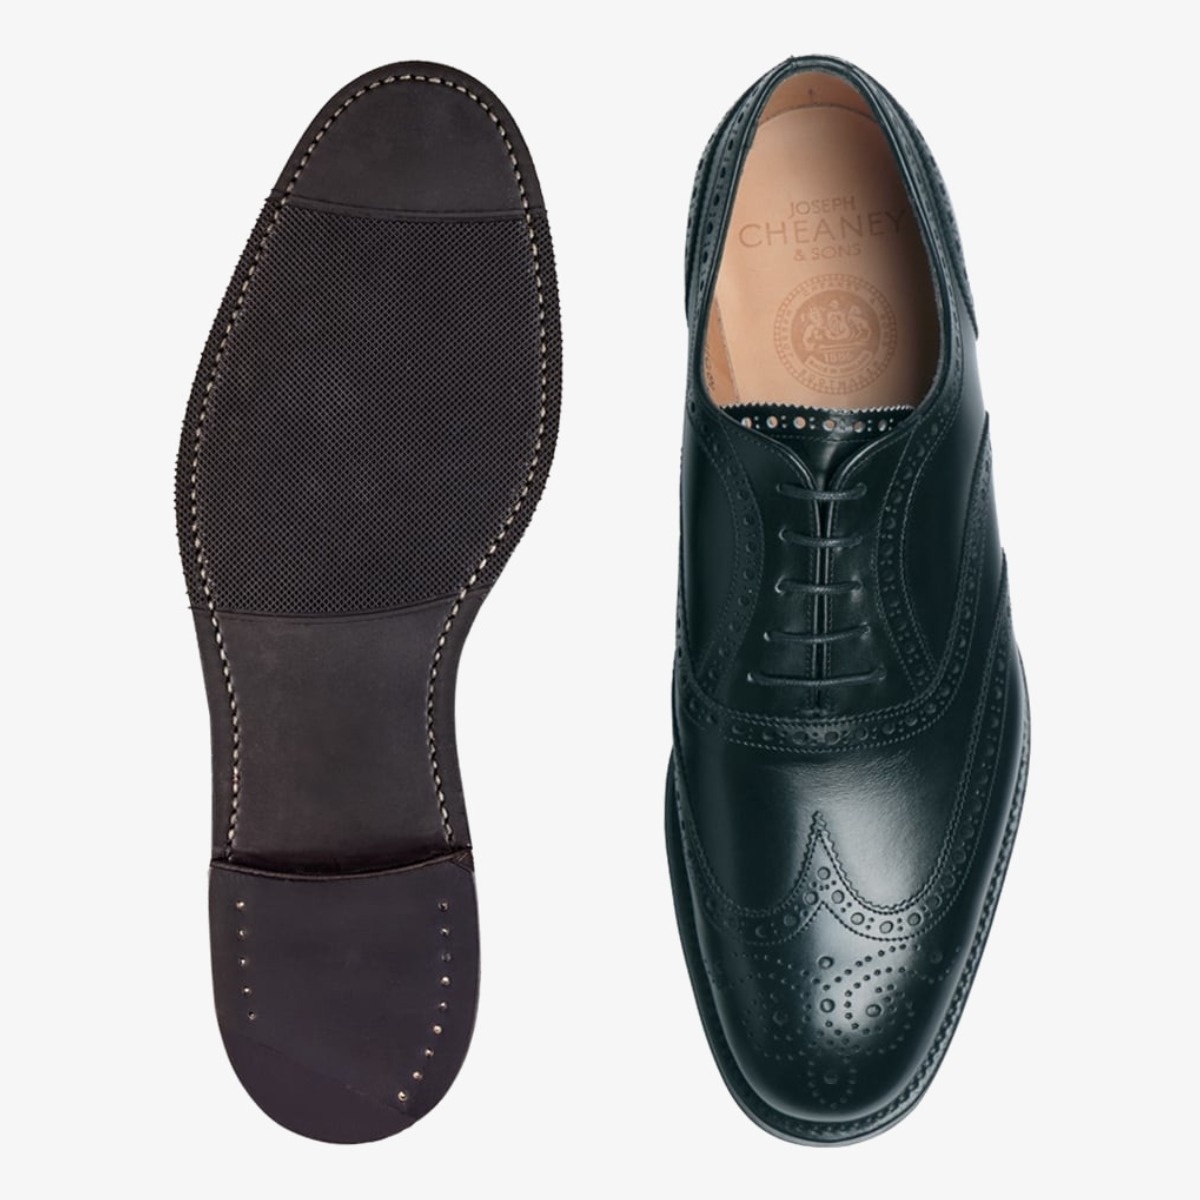 Cheaney Arthur III black brogue oxford shoes - rubber soles